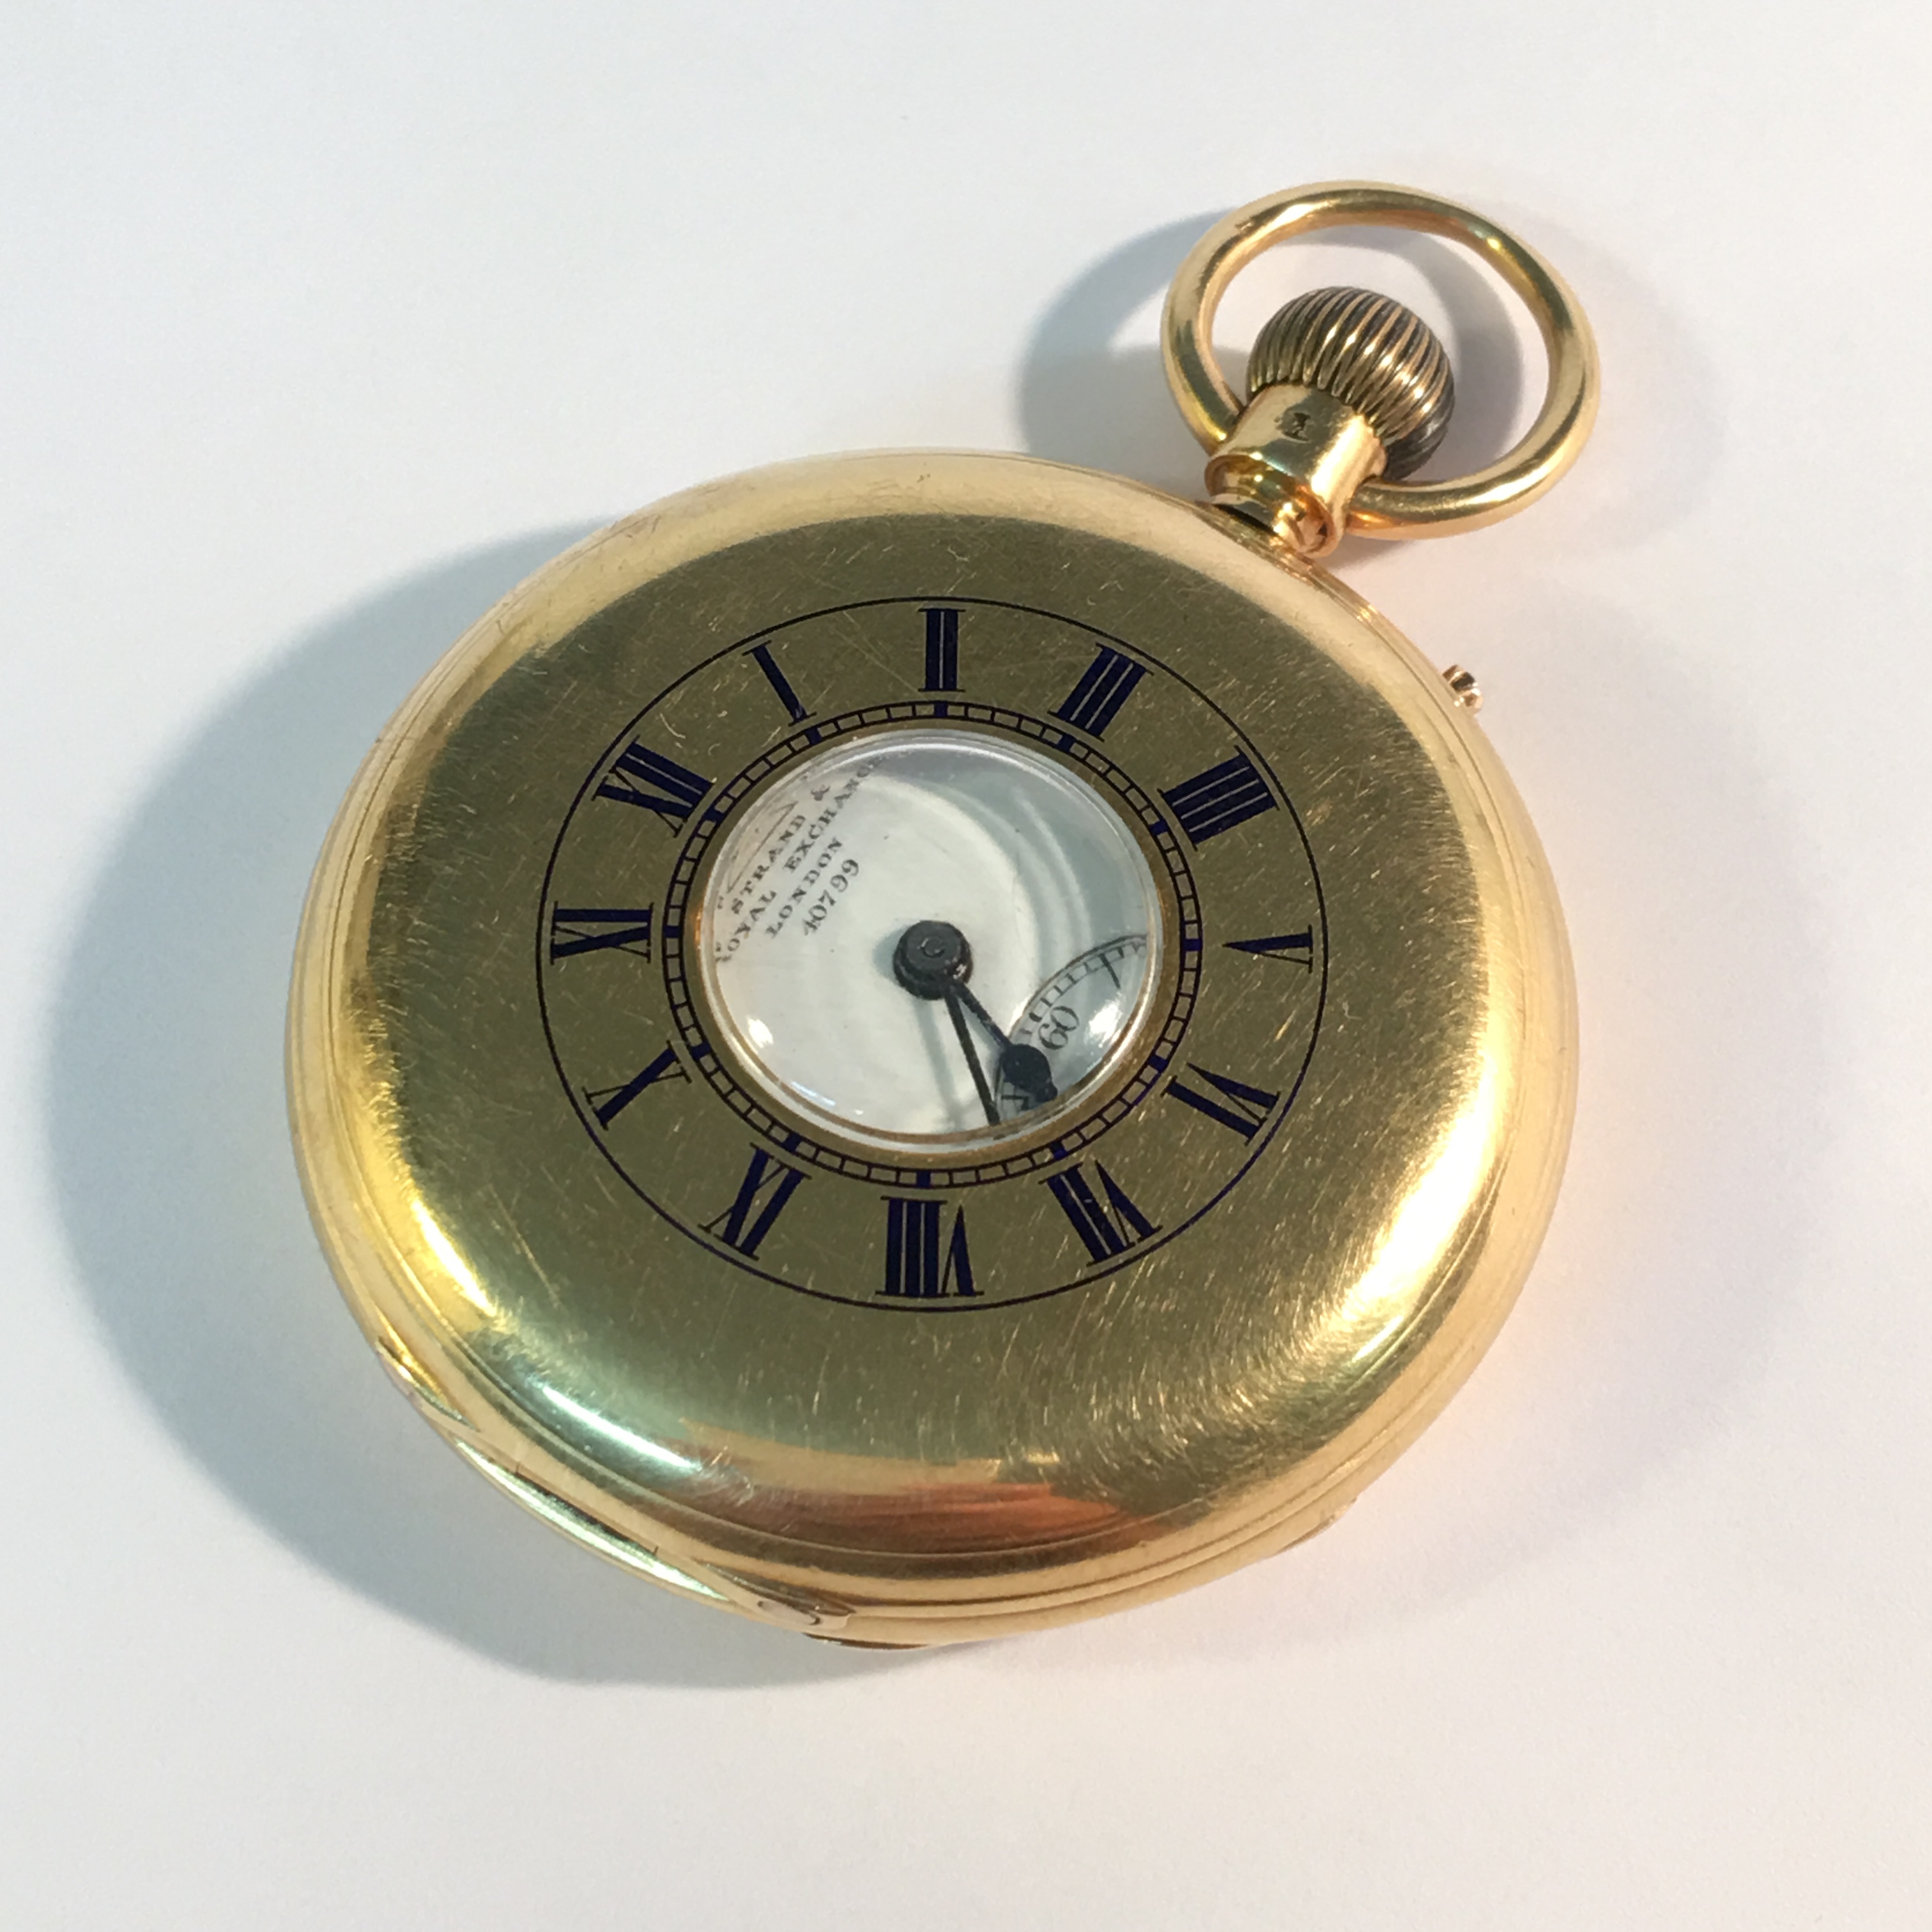 An 18ct gold half hunter pocket watch with enamel dial by Dent of London - Image 2 of 7